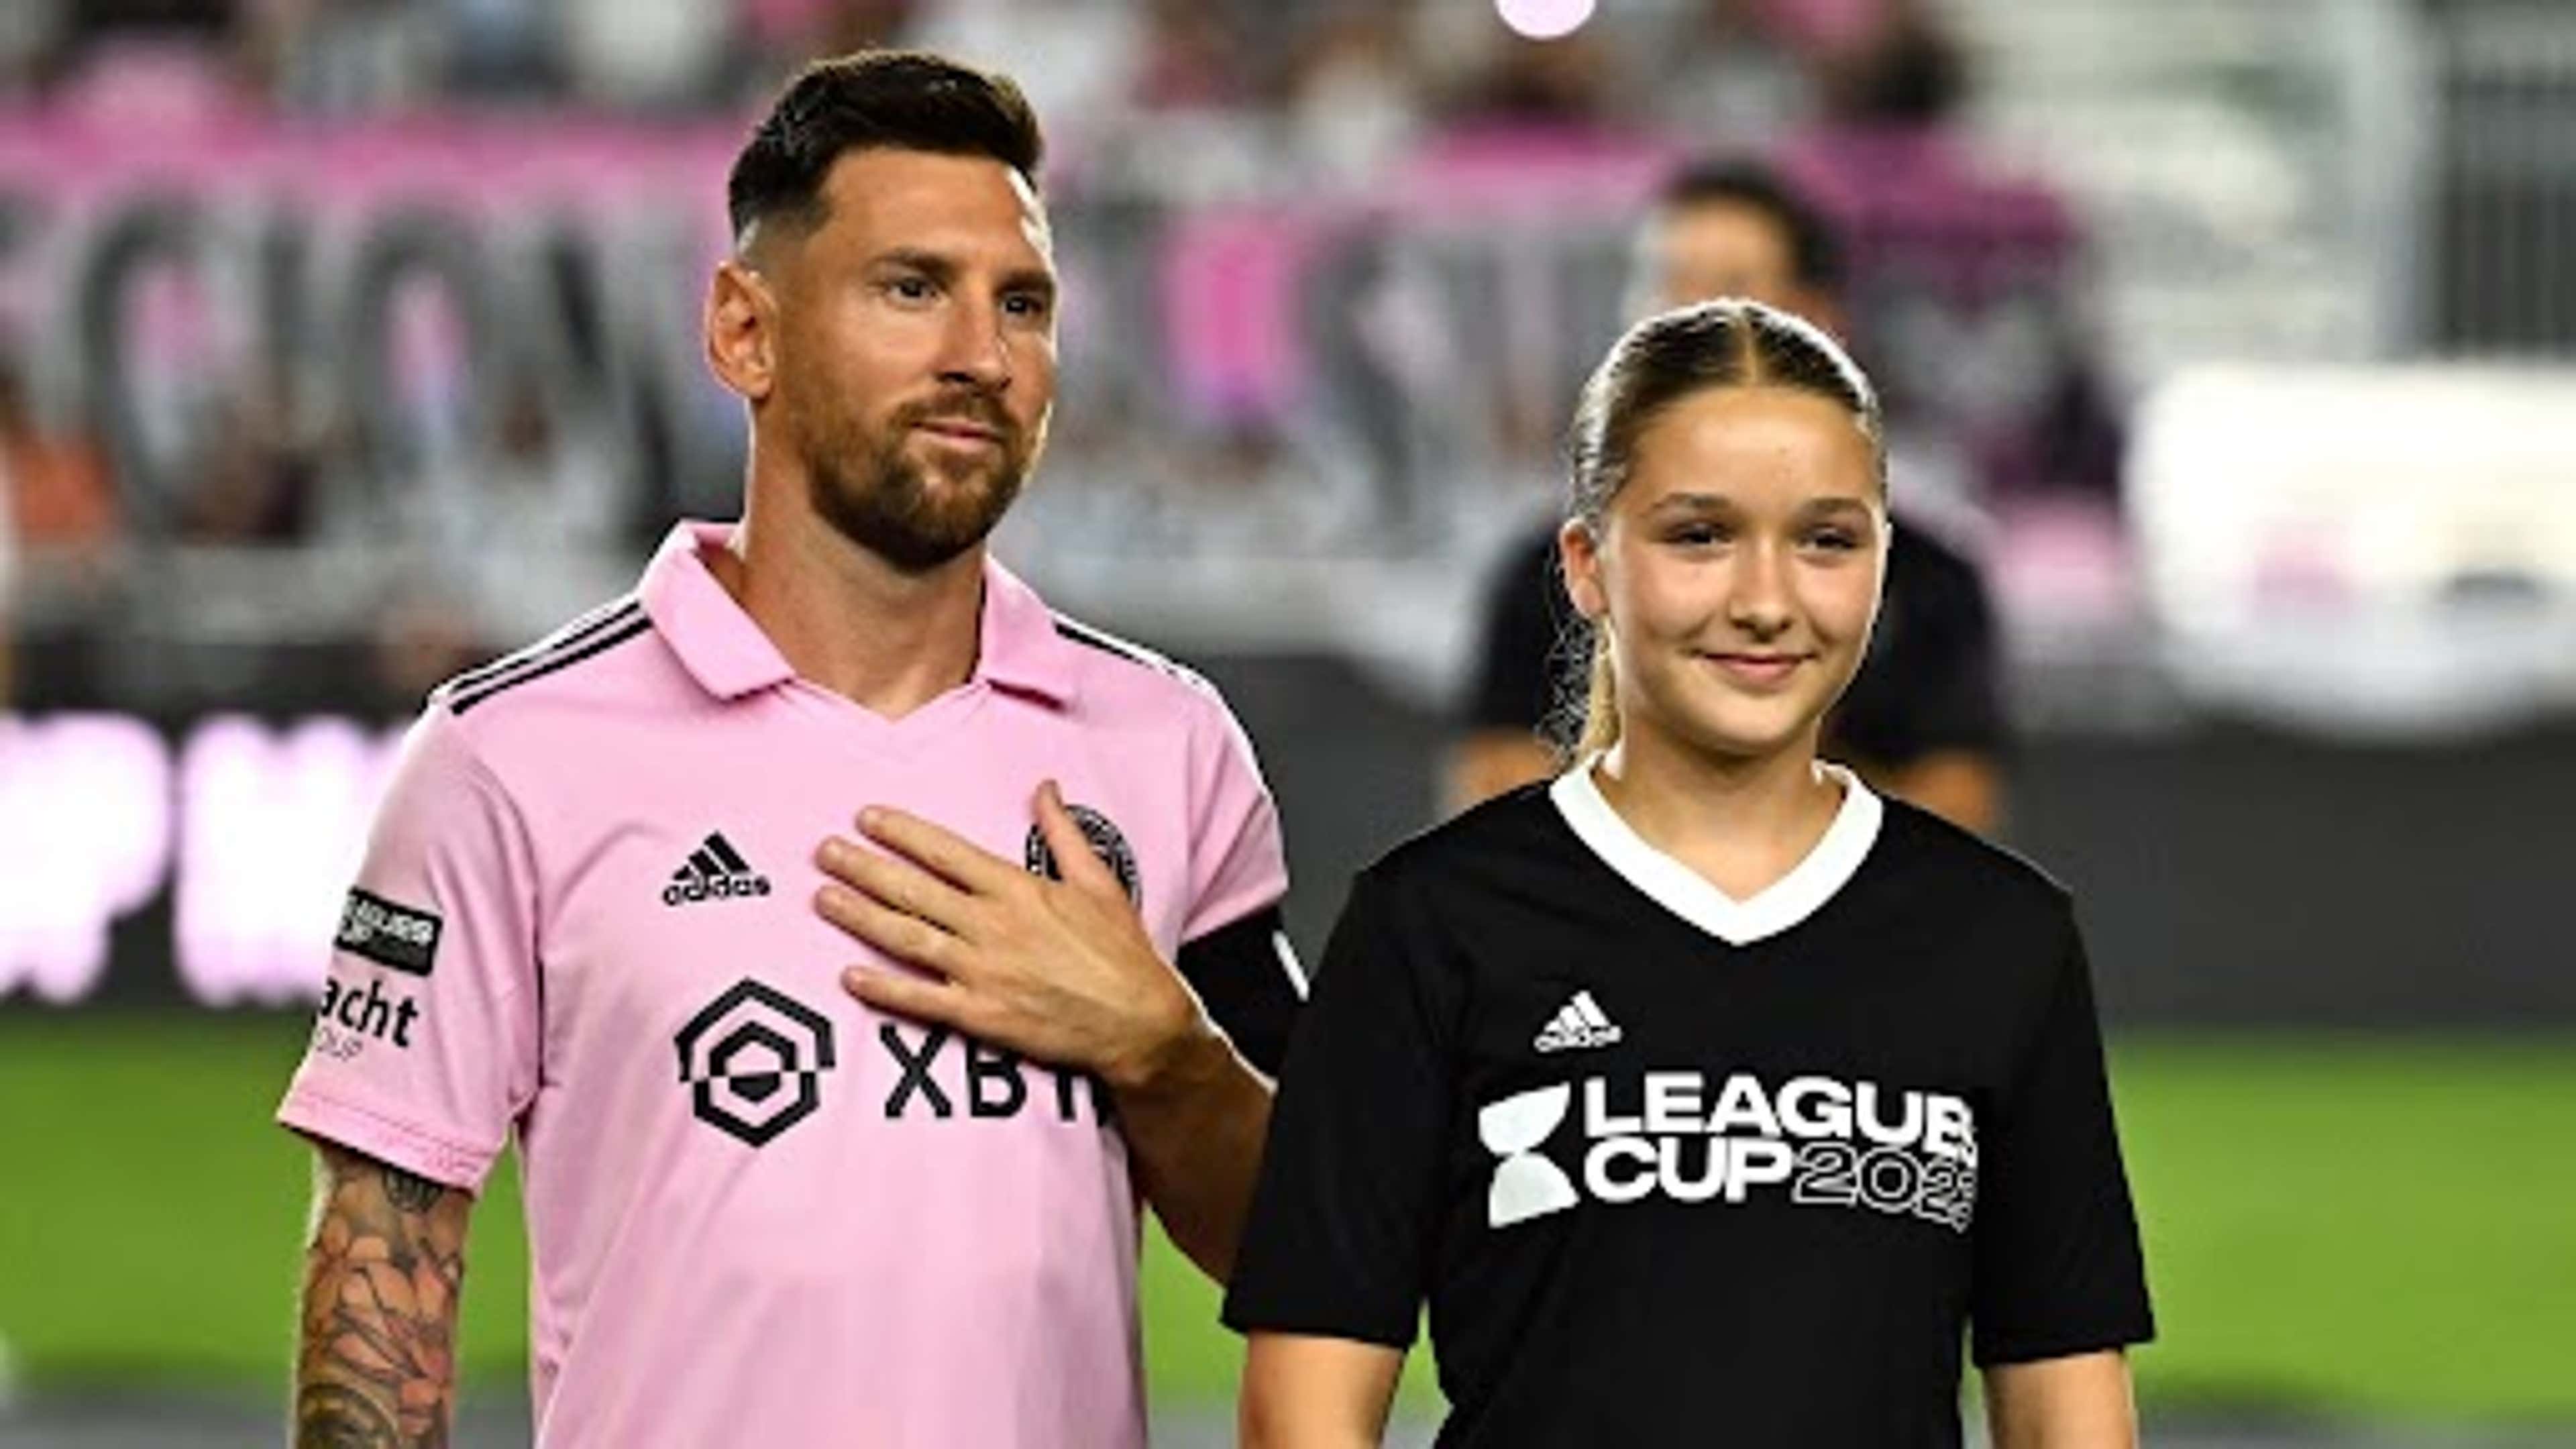 rr Inter Miami triumphs over Charlotte, securing a spot in the League Cup semifinals; Messi exits the match accompanied by Beckham's daughter. - LifeAnimal